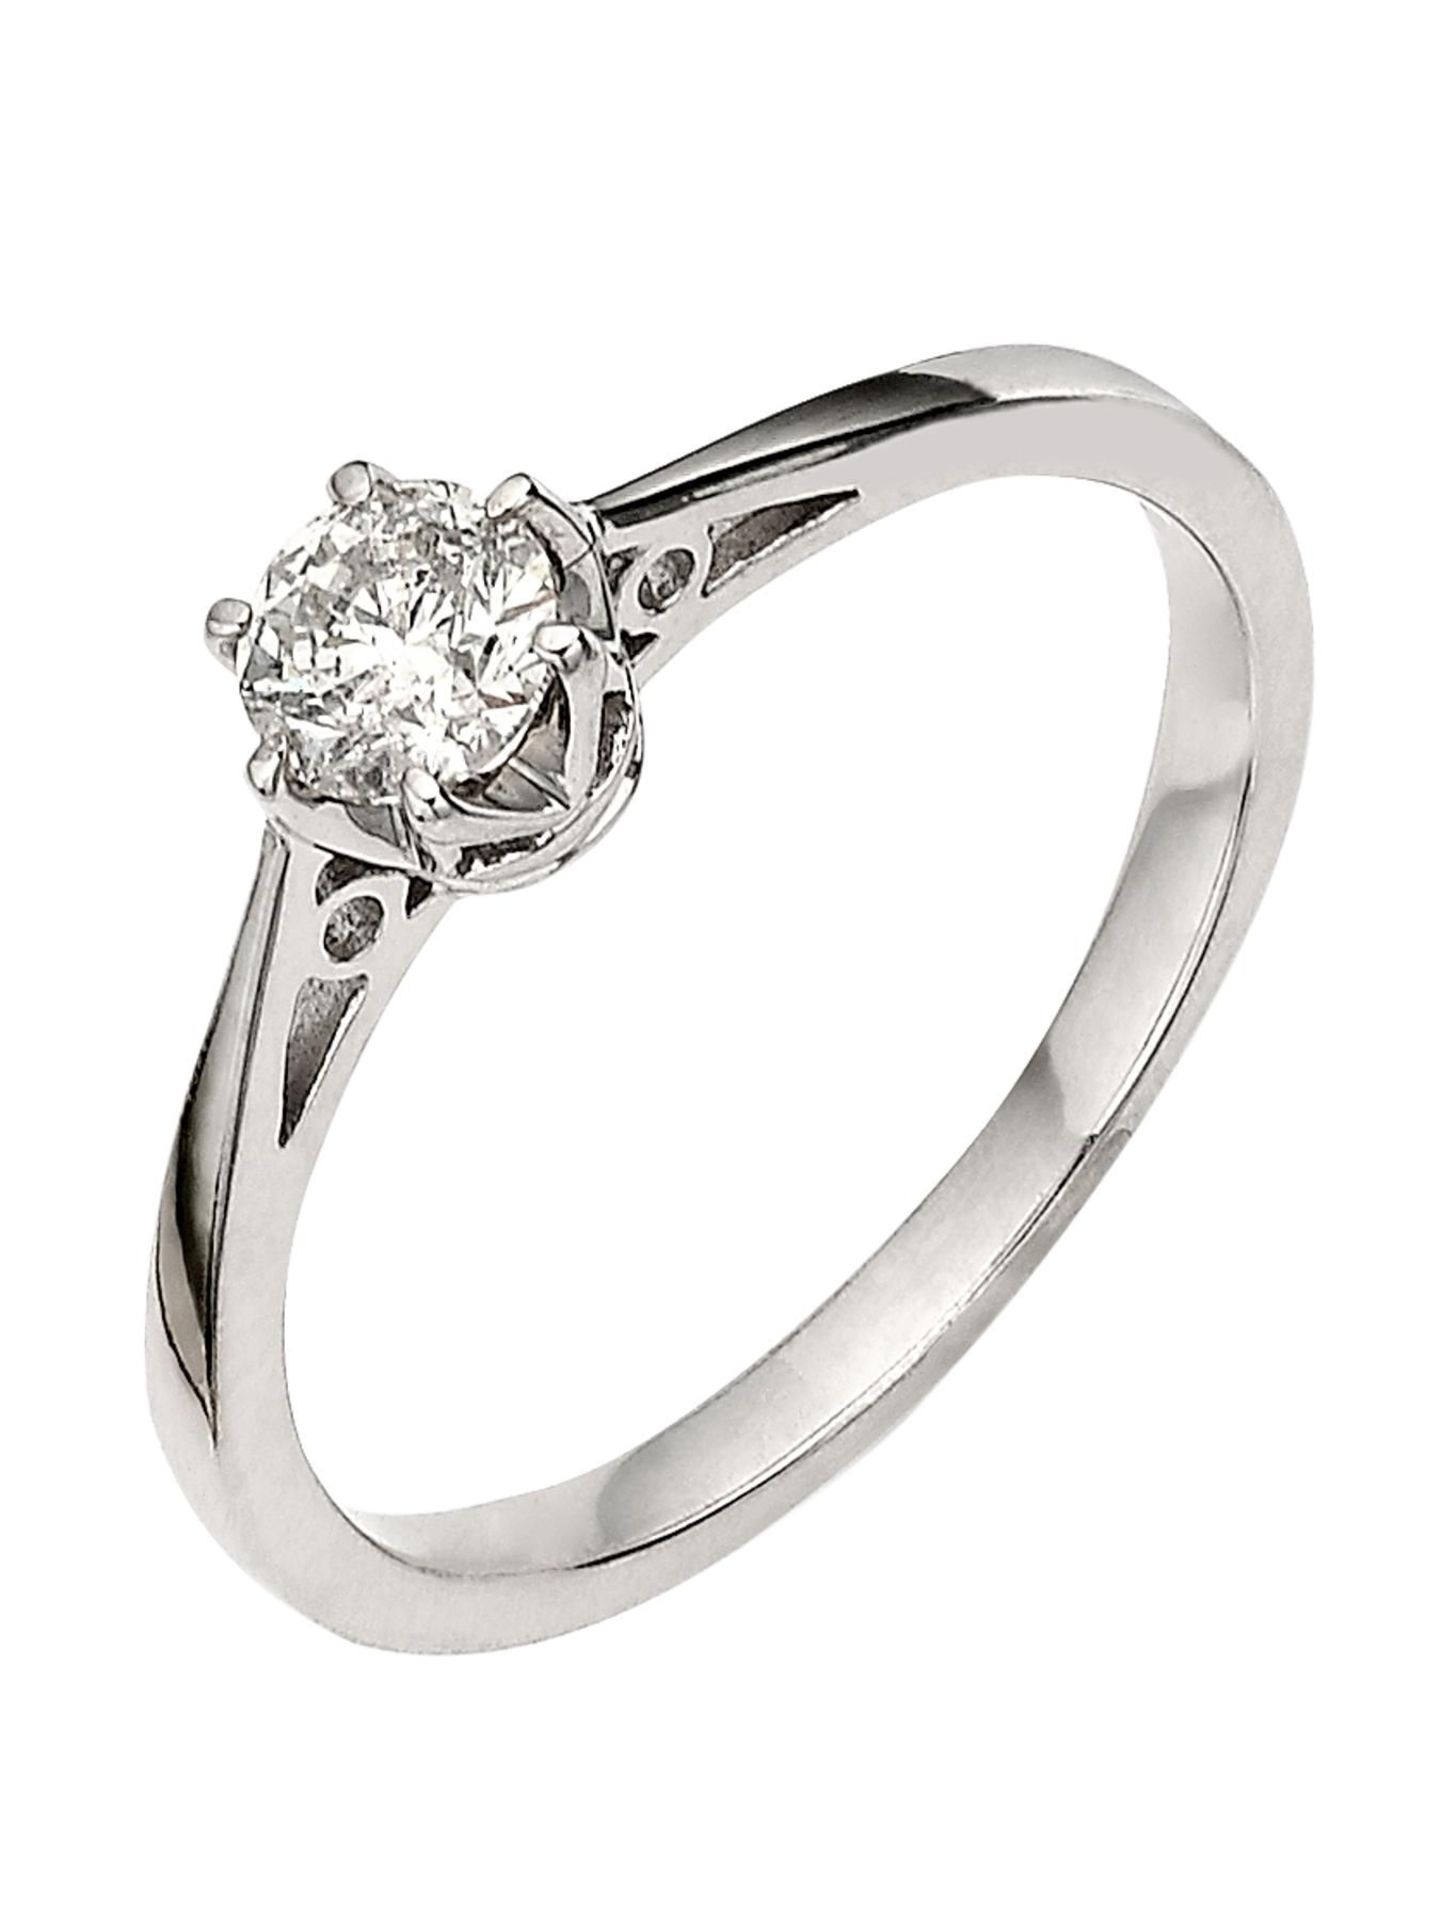 Diamond Solitaire Engagement 9ct White Gold Ring RRP £635 Size N